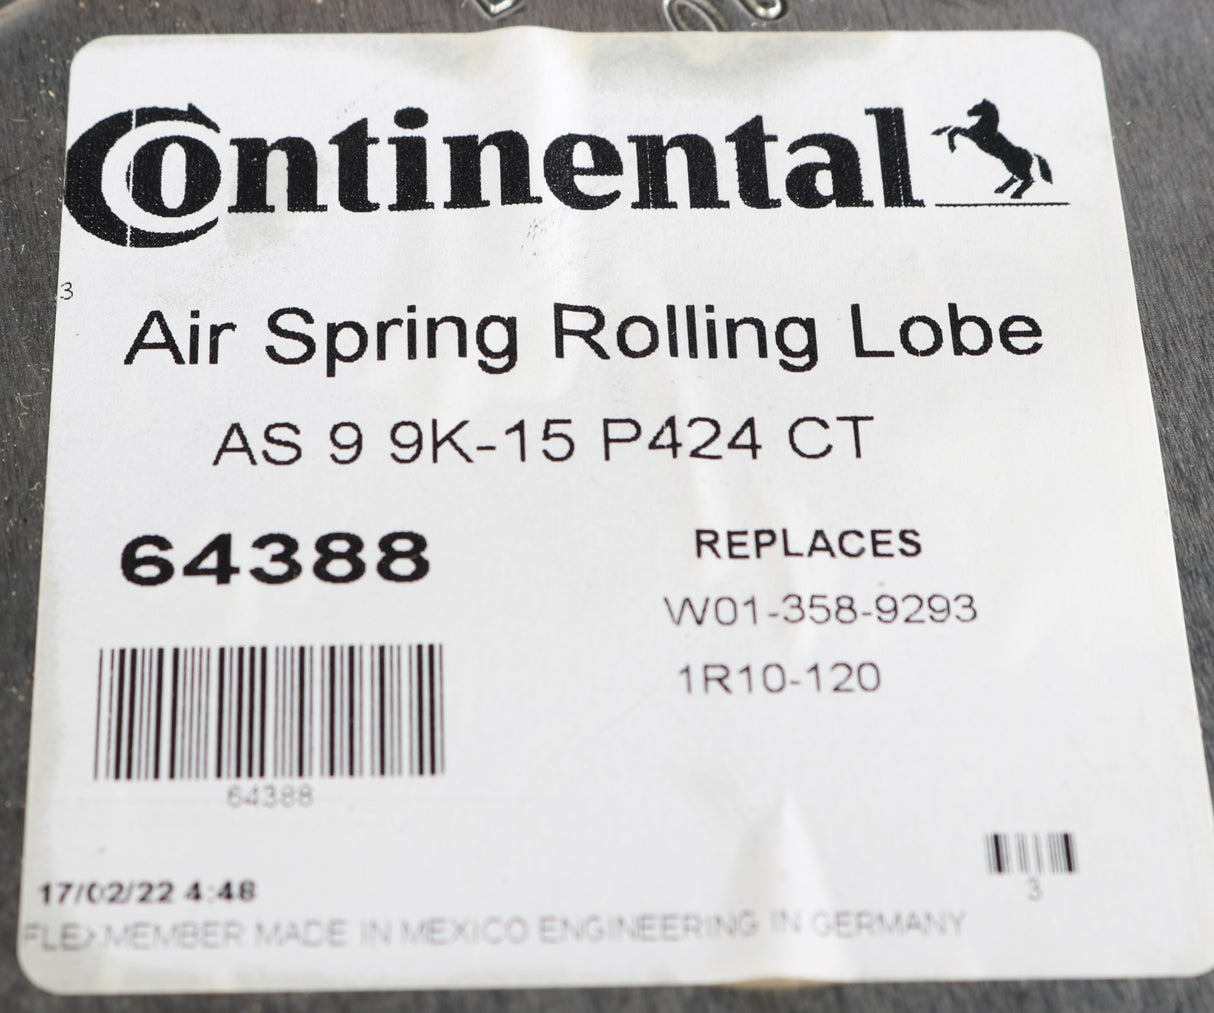 CONTINENTAL AG - CONTITECH/ELITE/GOODYEAR/ROULUNDS ­-­ 64388 ­-­ AIR SPRING ROLLING LOBE